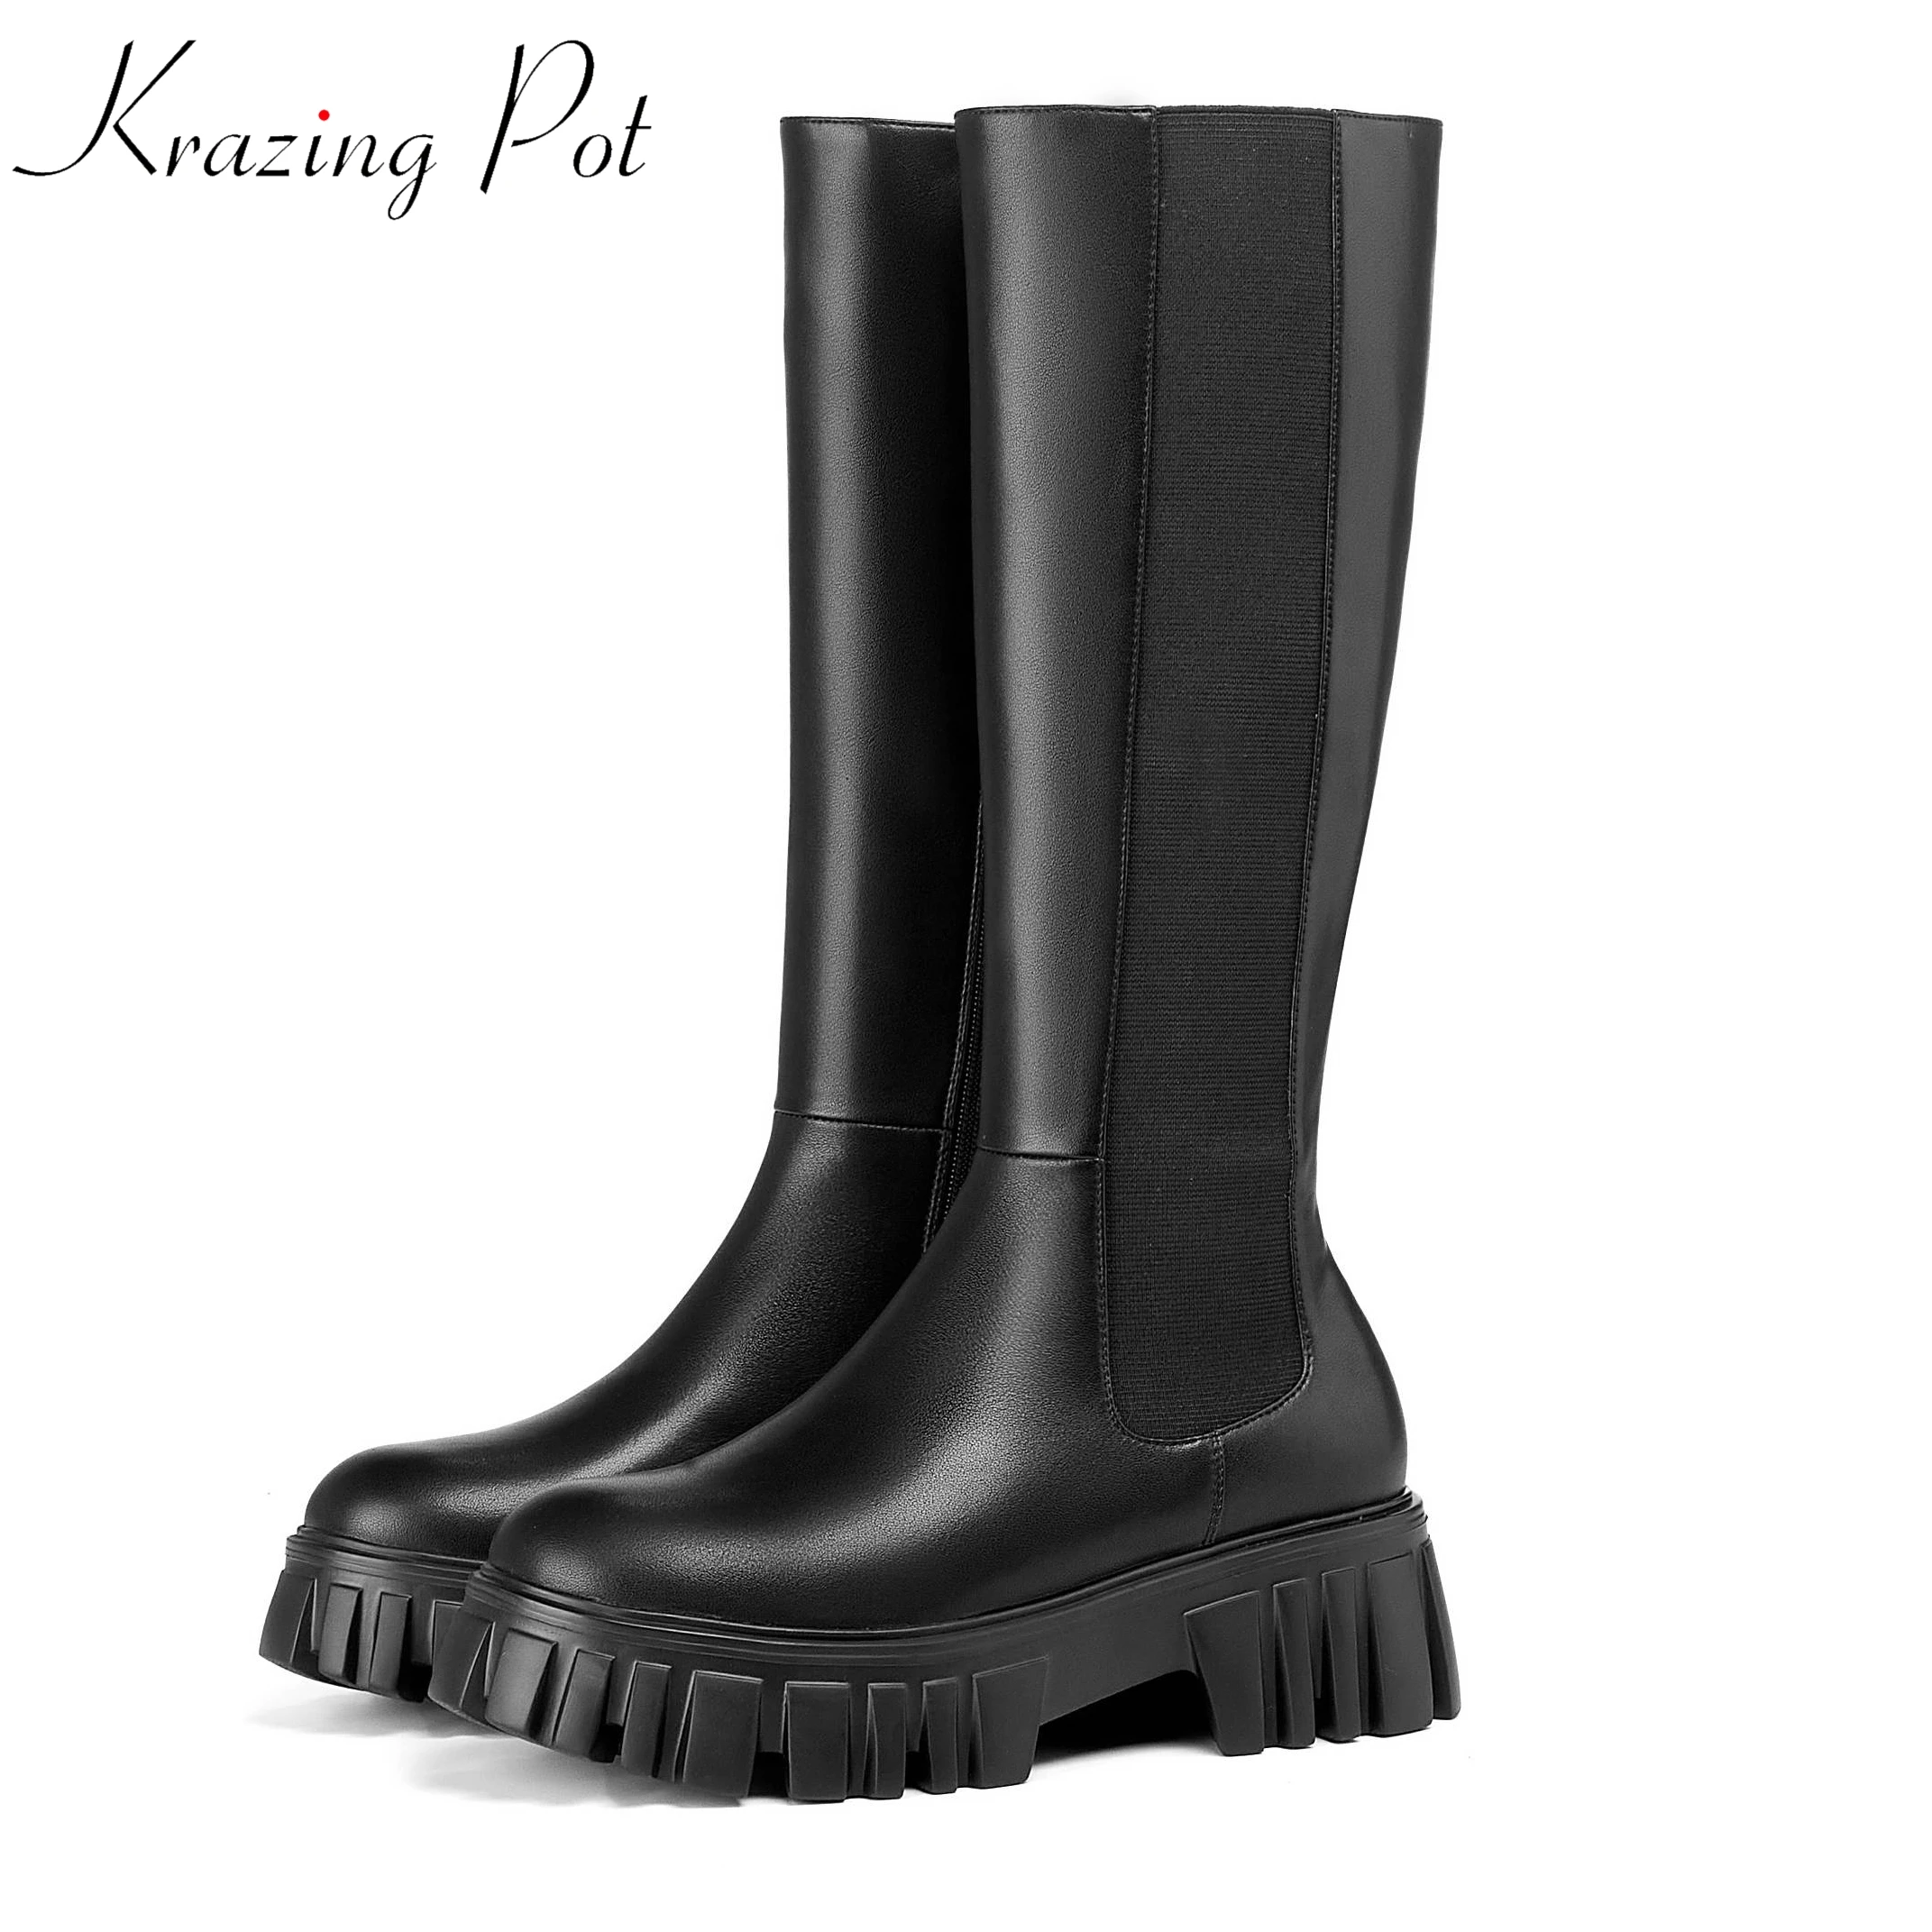 

Krazing Pot cow leather equestrian boots round toe mature lady dating classic basic platform keep warm winter thigh high boots